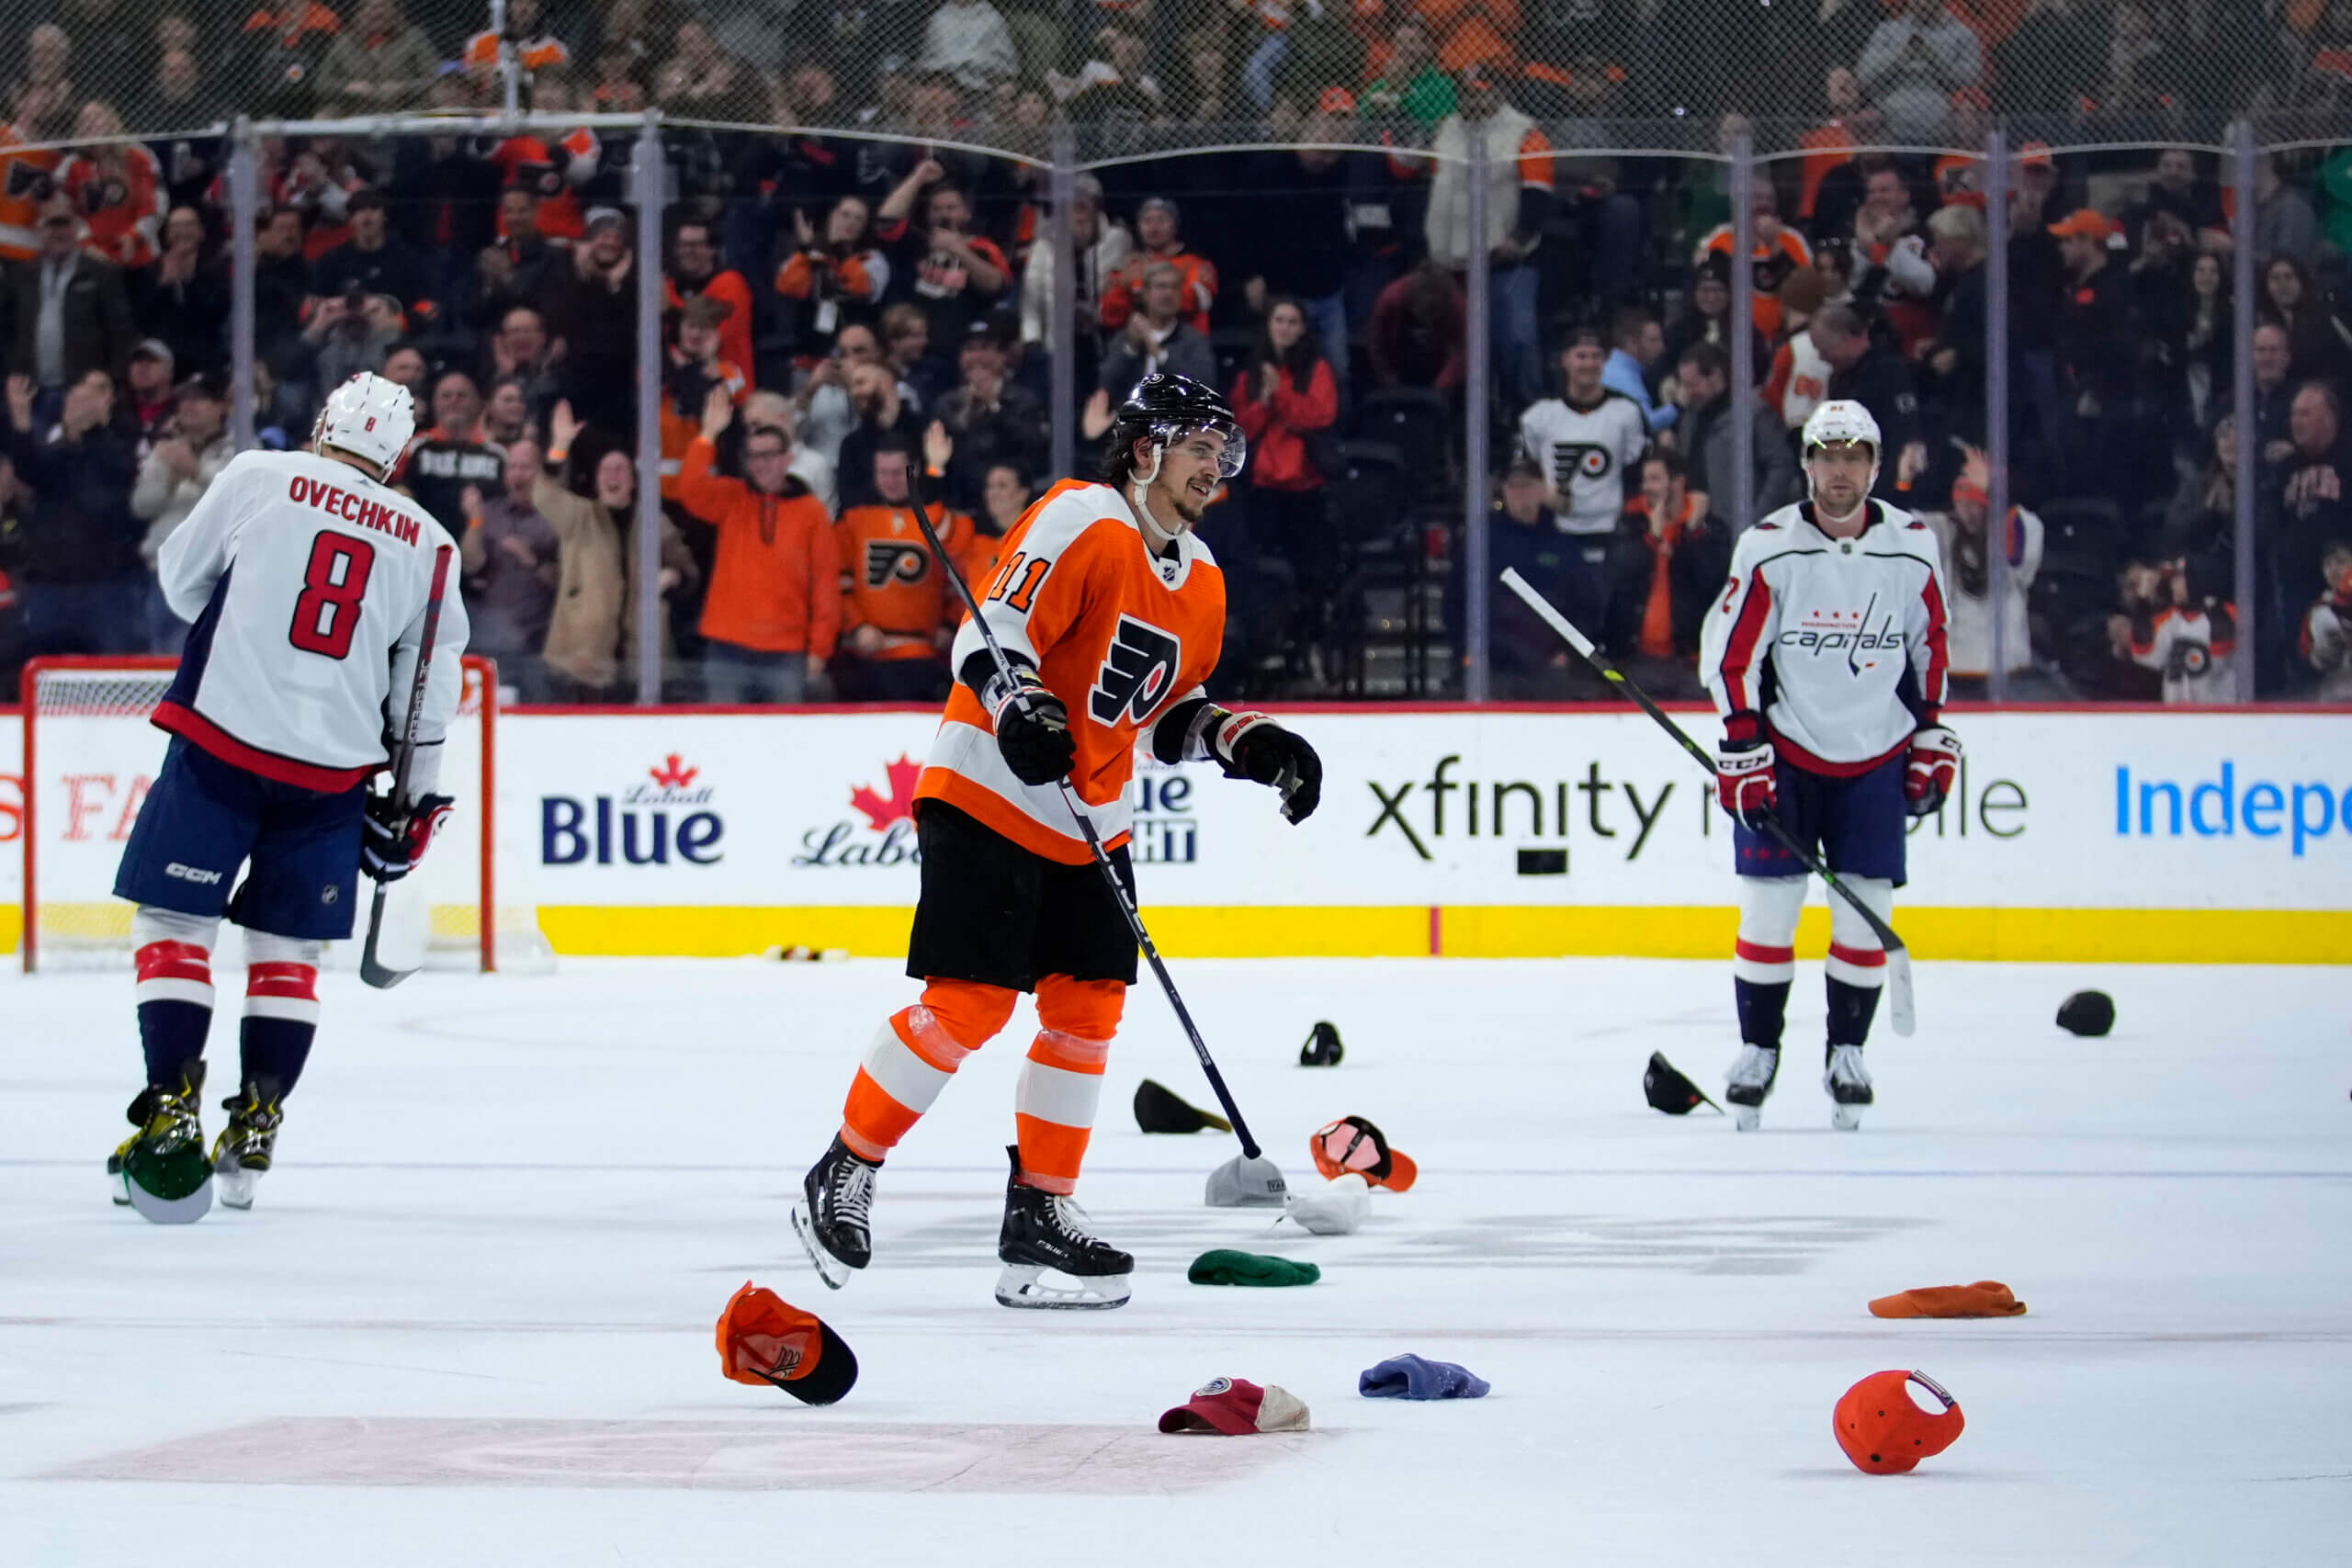 A Summary of All the Disgraceful Things Flyers Fans Did During